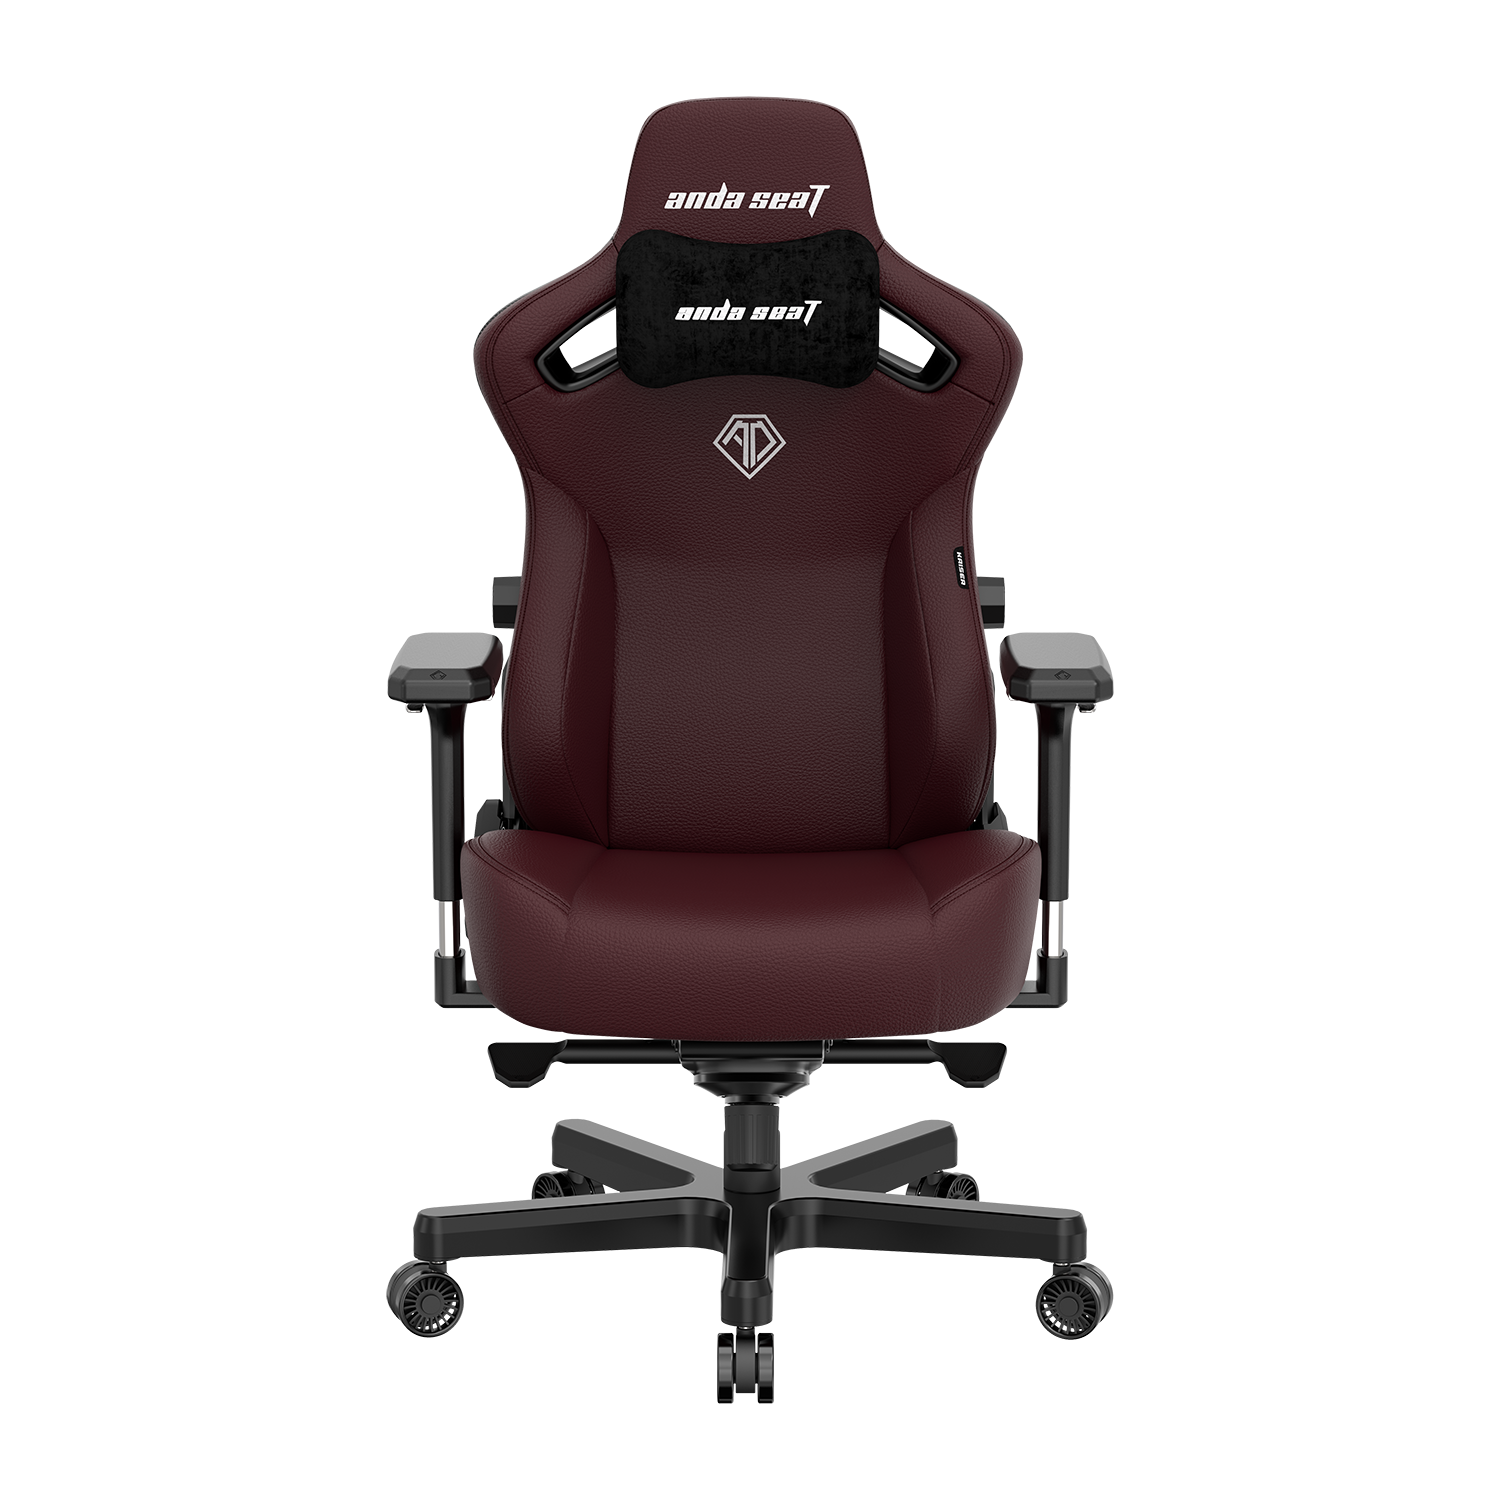 ANDASEAT KAISER 3 L SIZE DURAXTRA LEATHERETTE - CLASSIC MAROON